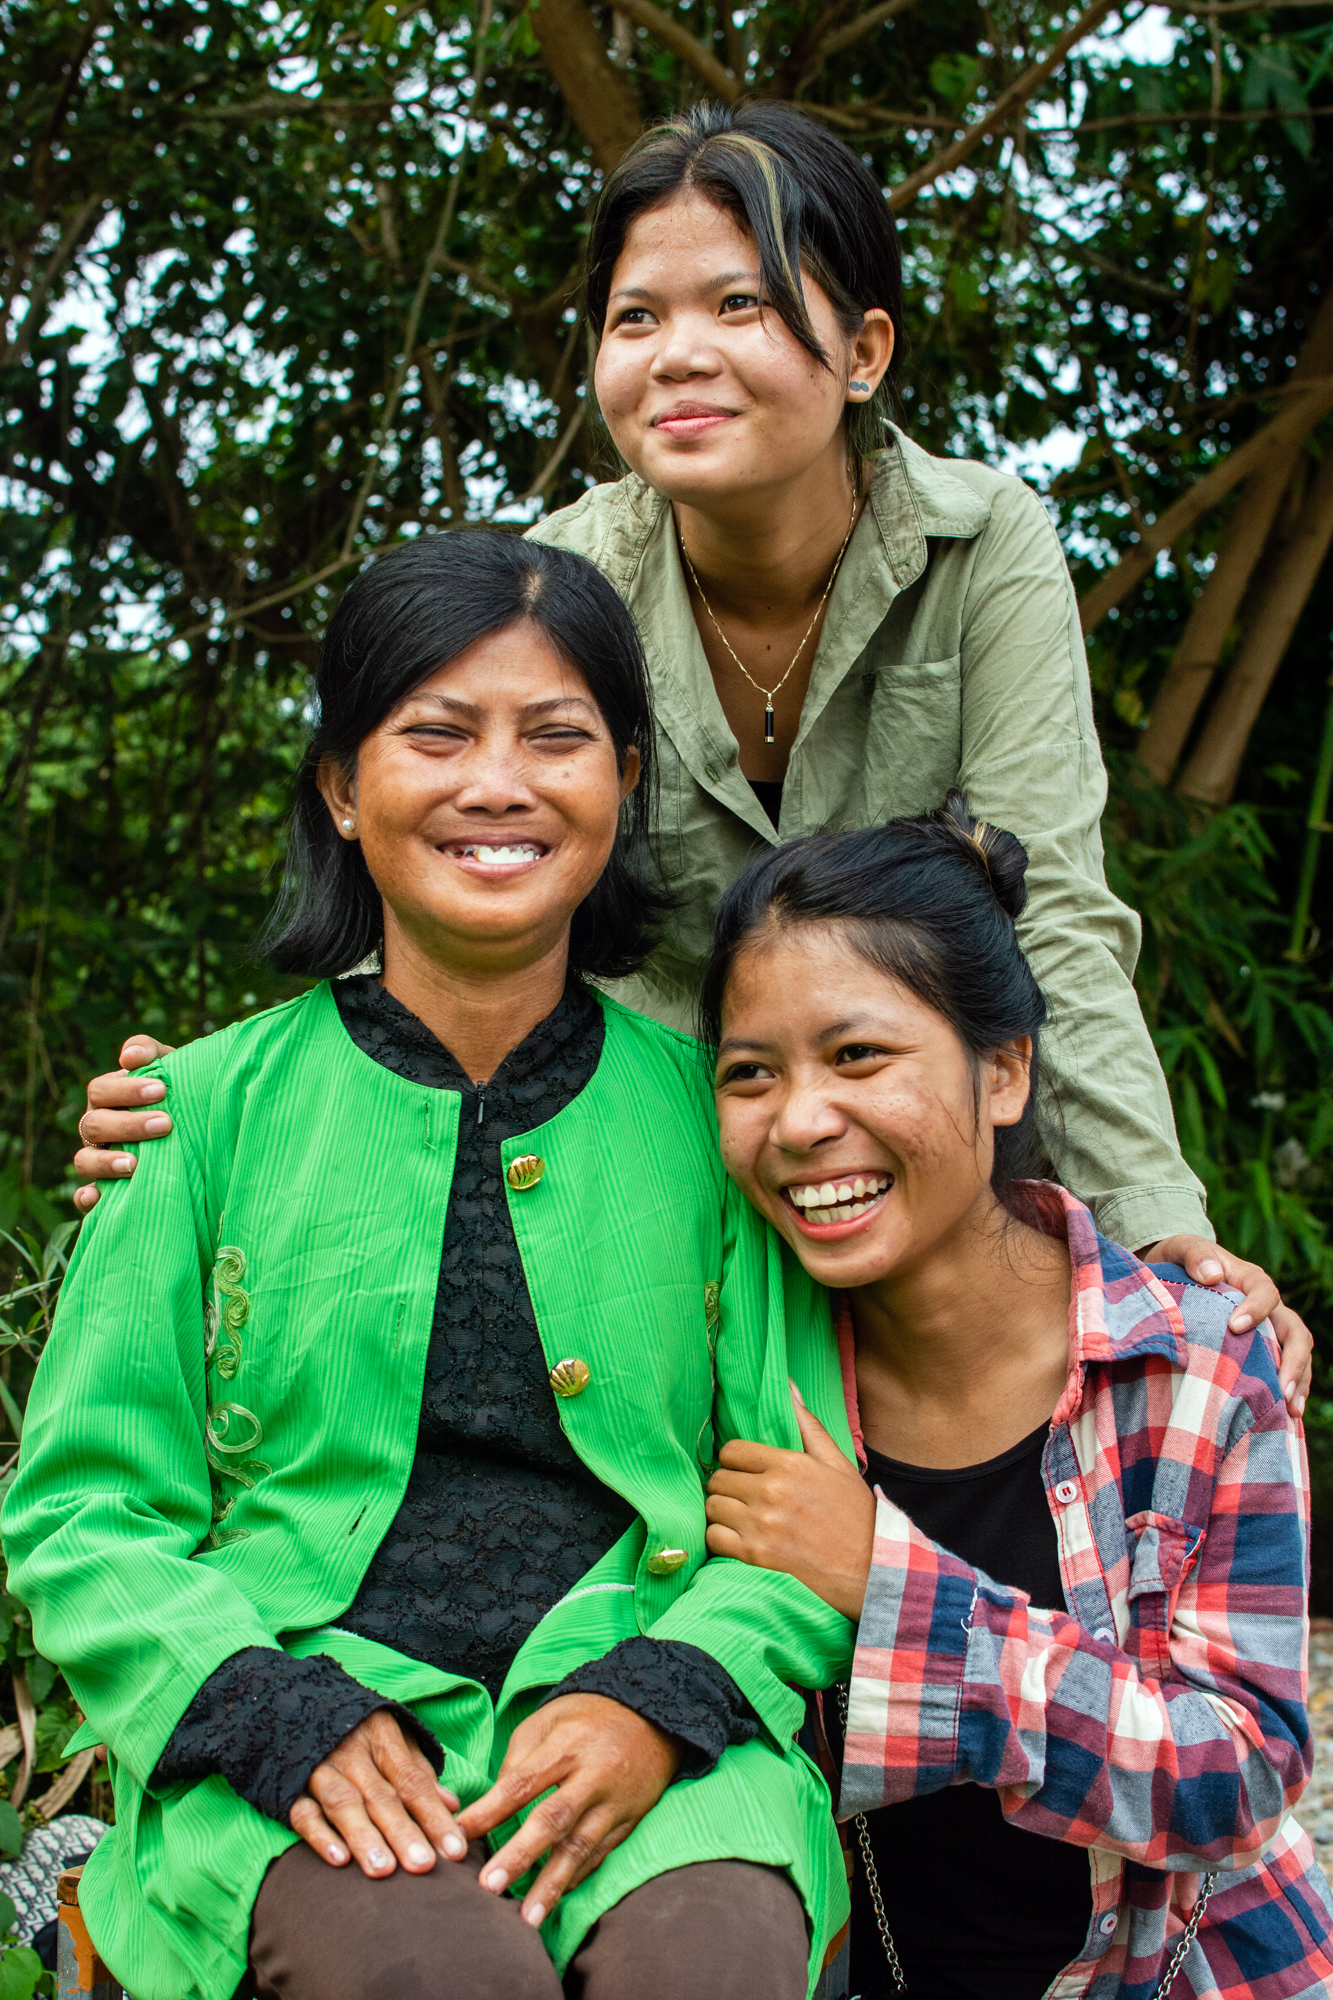 A Family Move – Providing a Better Future for Her Daughters